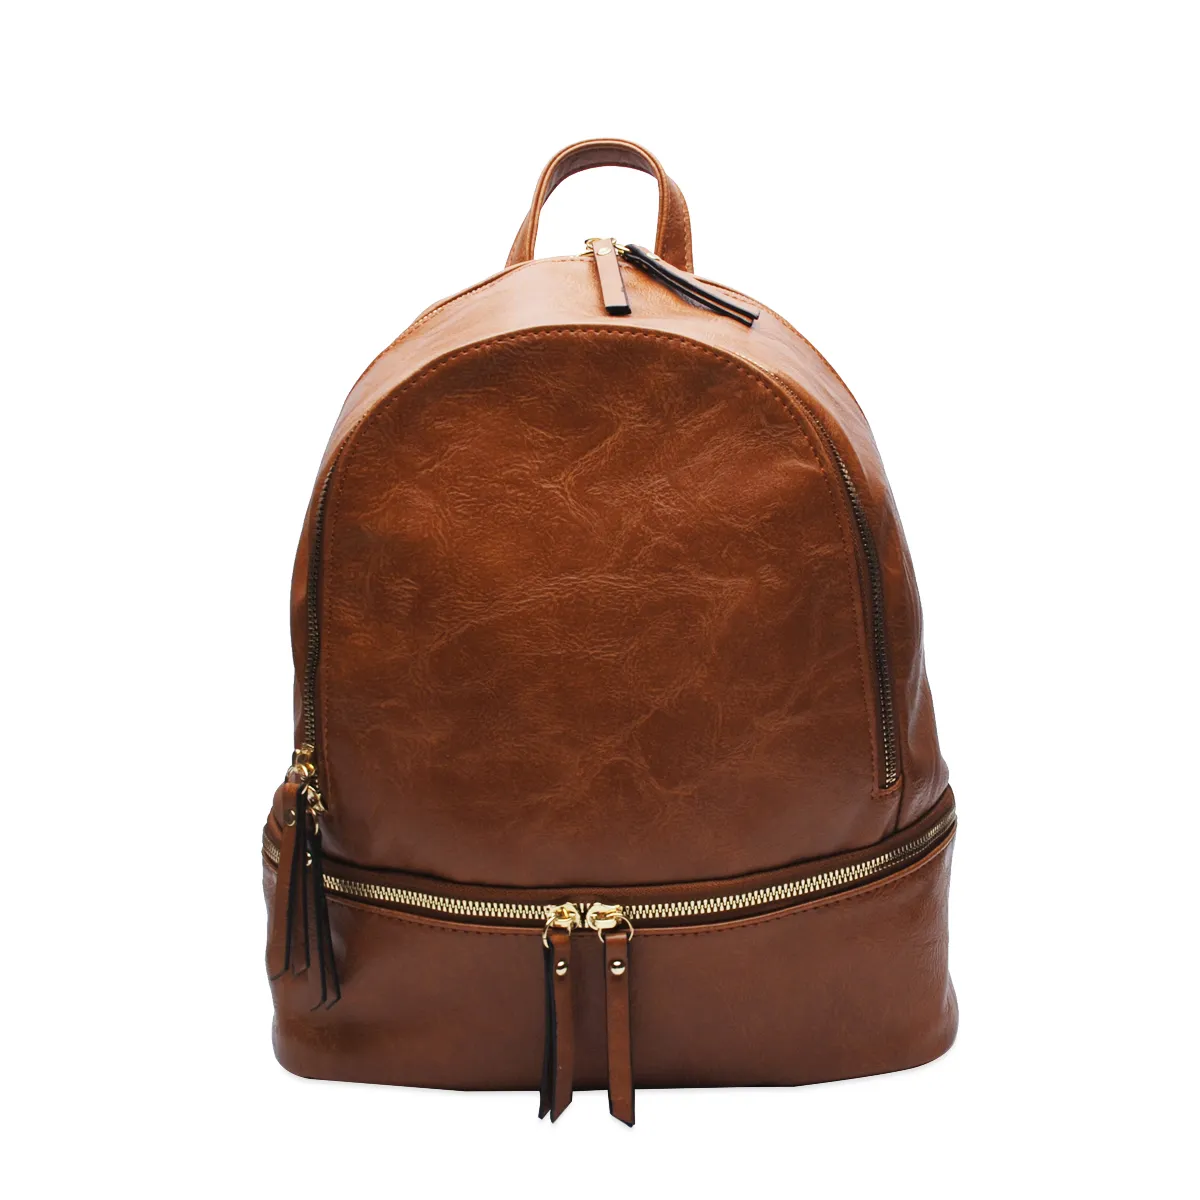 Forever Glam By Pantaloons Backpacks & Duffle Bags Price in India |  Backpacks & Duffle Bags Price List in India - DTashion.com